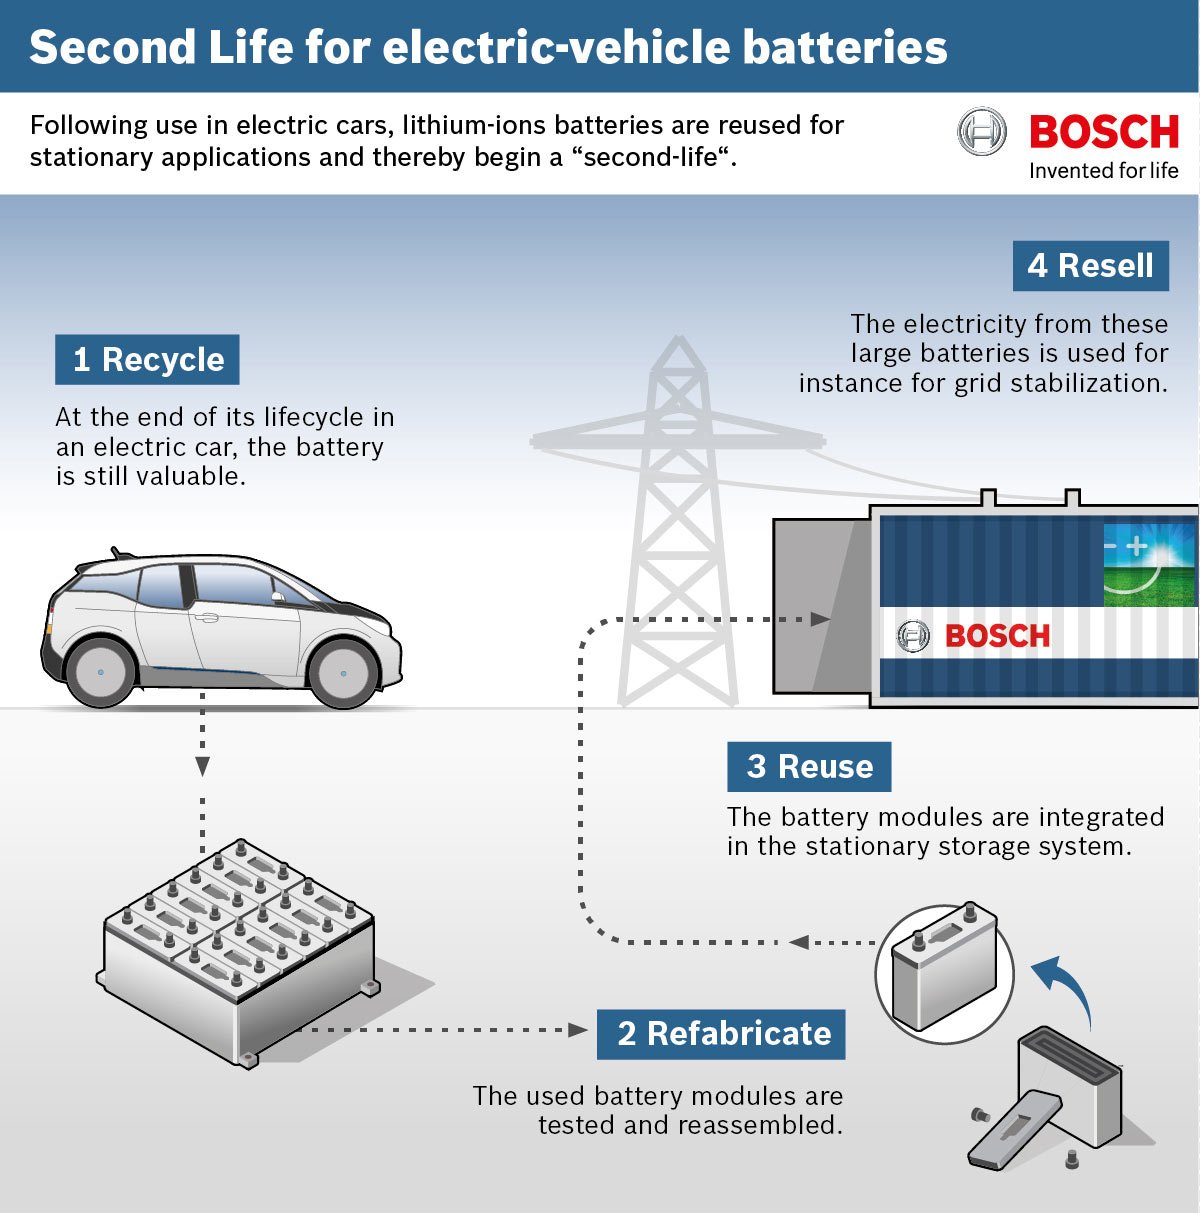 BMW, Bosch, &  Vattenfall to recycle electric